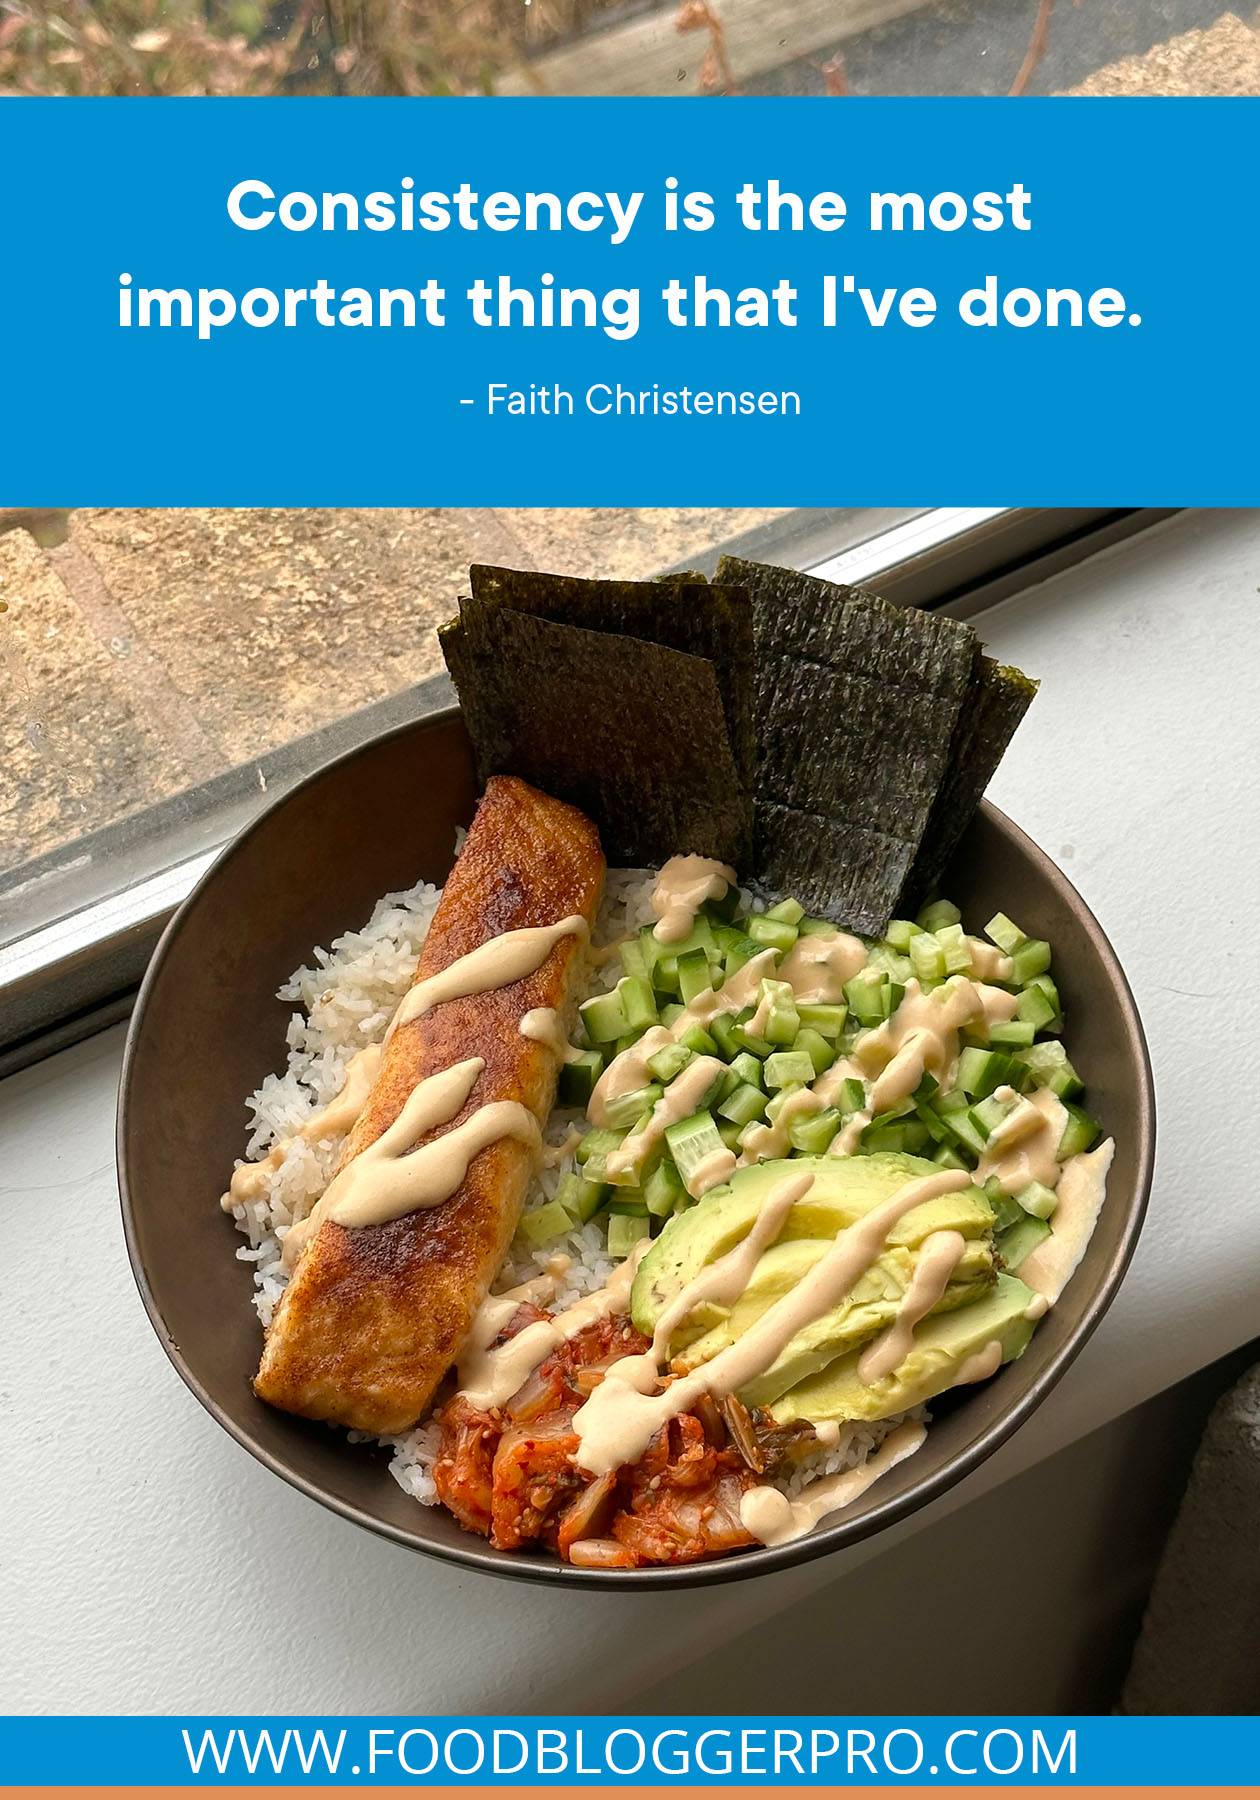 A photograph of a rice bowl with a quote from Faith Christensen's episode of The Food Blogger Pro Podcast that reads "Consistency is the most important thing that I've done."